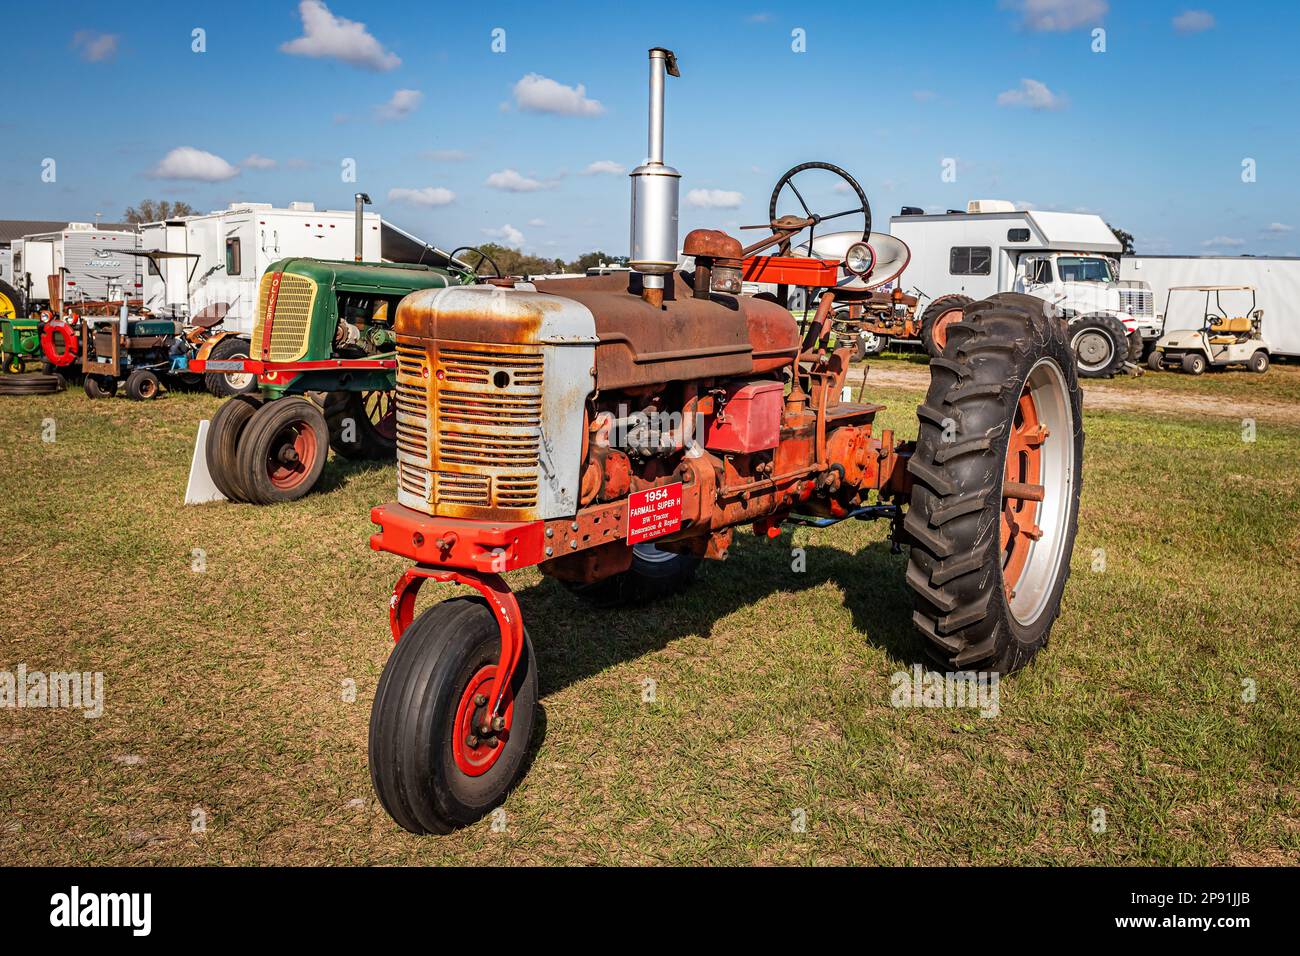 Fort Meade, FL - February 26, 2022: High perspective front corner view of a 1954 International Harvester McCormick Farmall Super H Tractor at a local Stock Photo